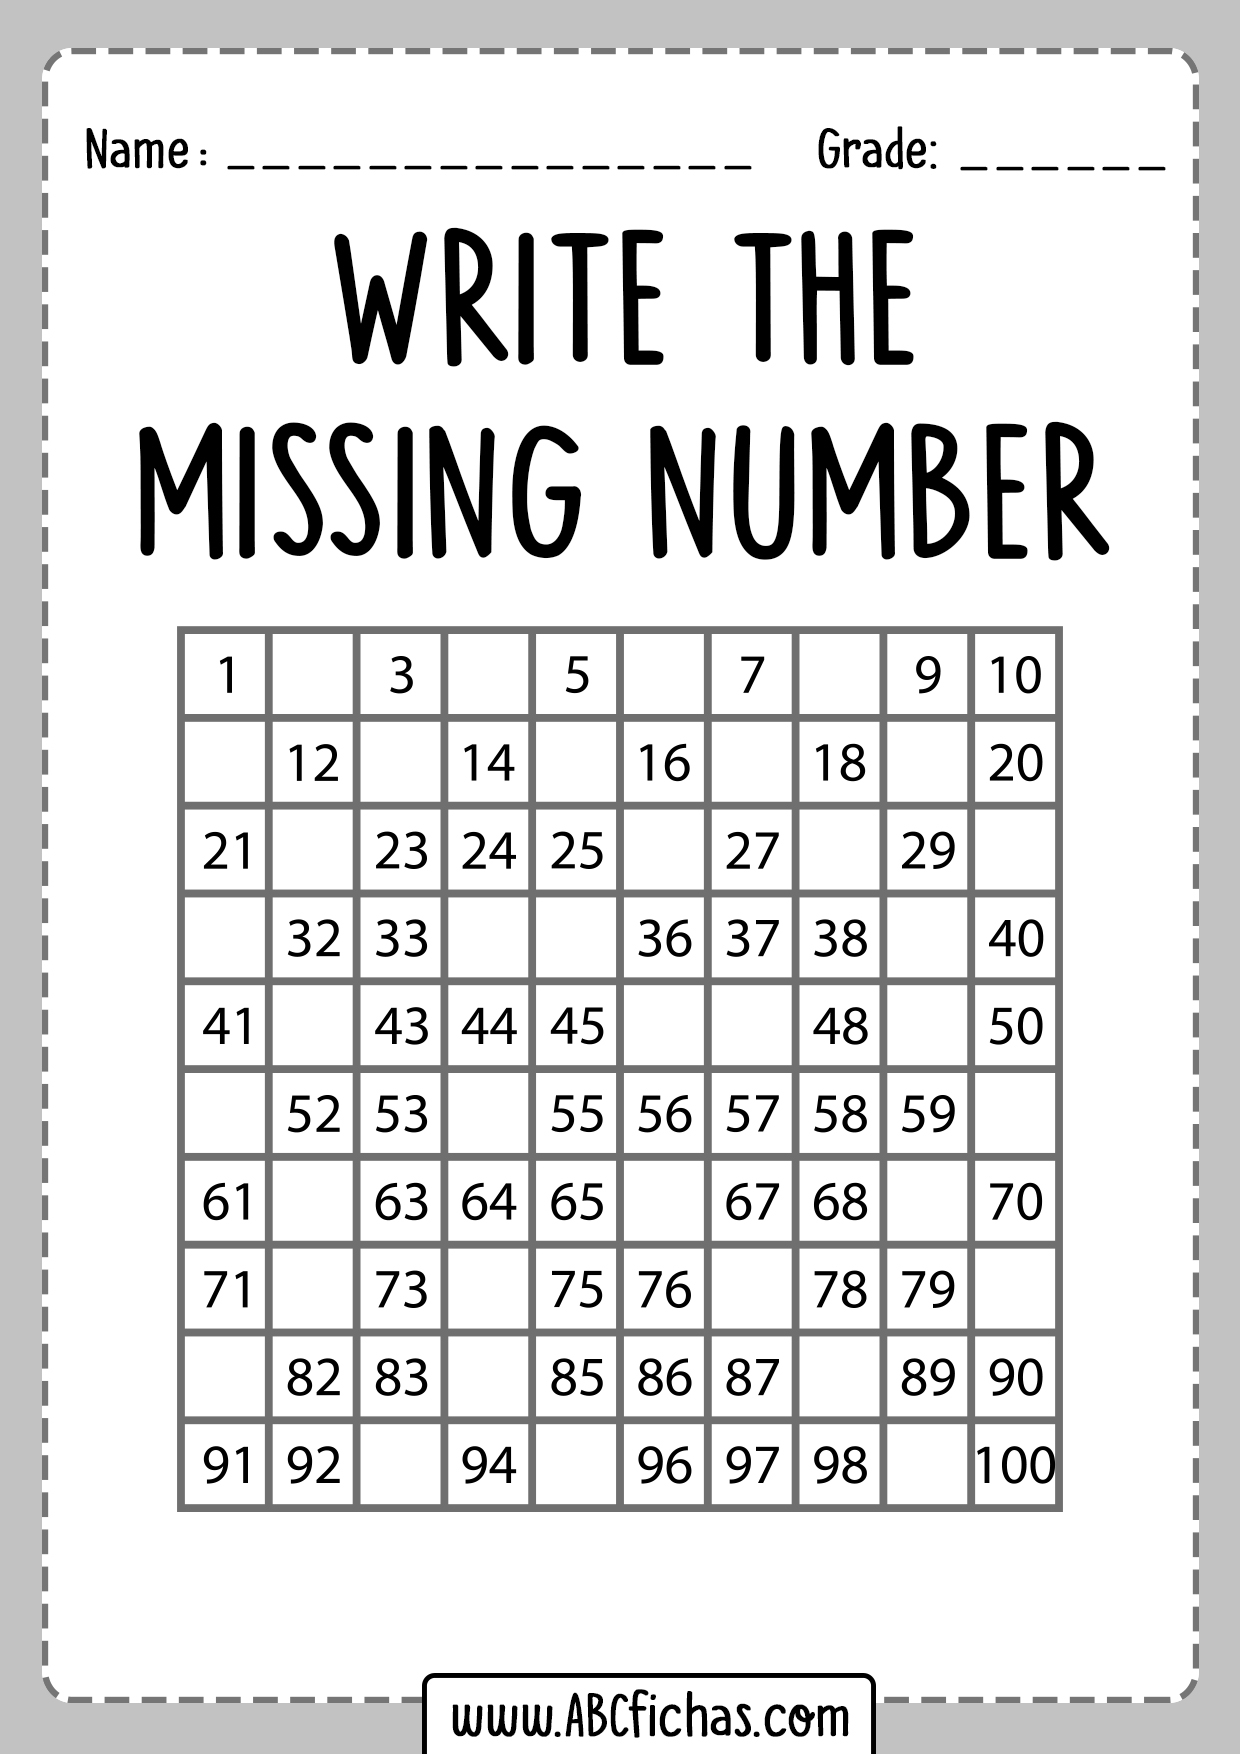 How Do You Find Missing Numbers